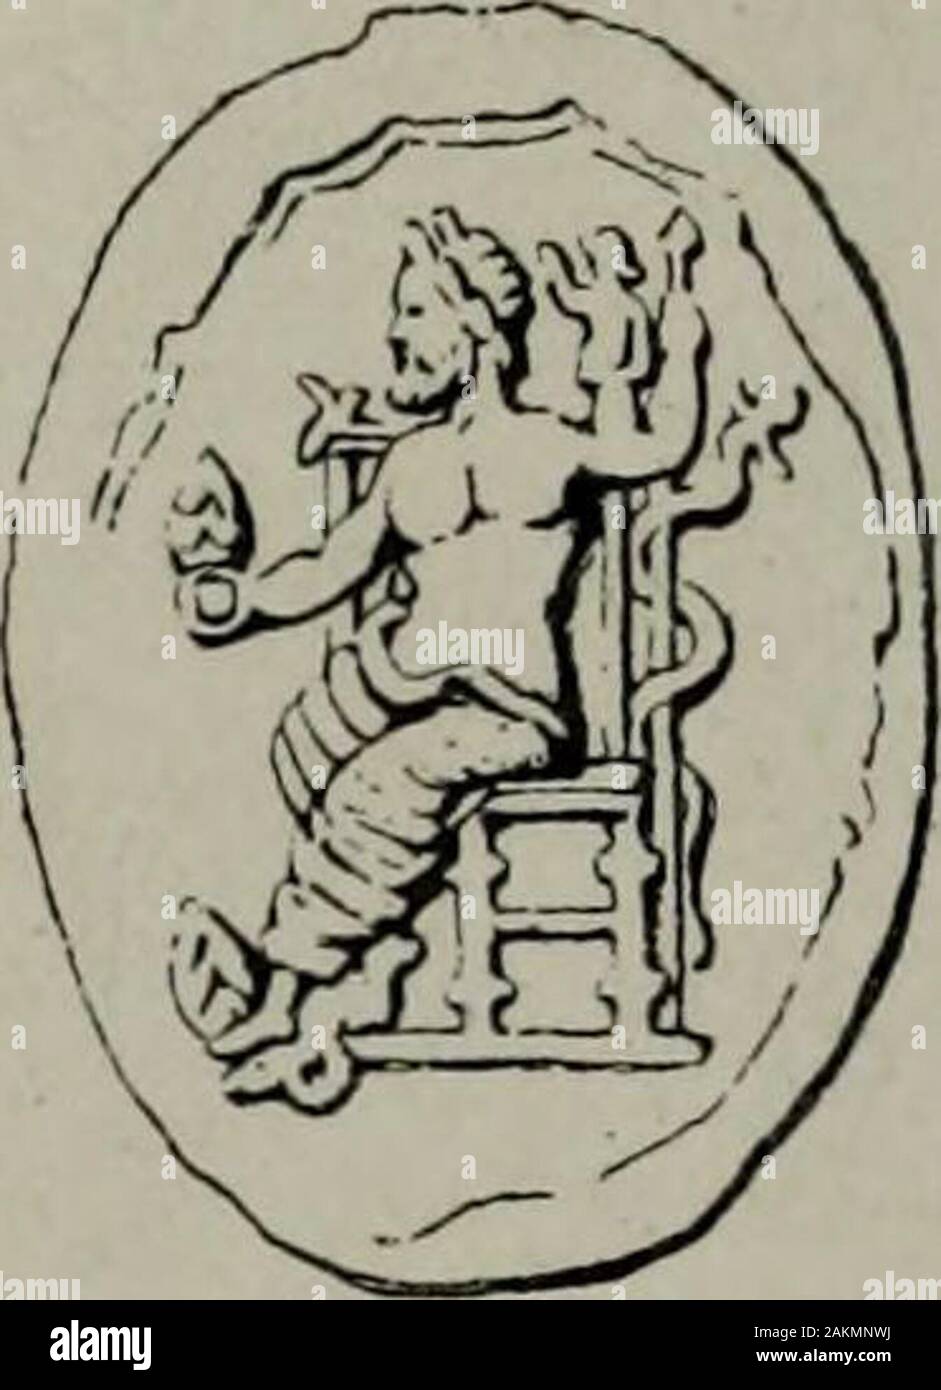 Zeus : a study in ancient religion . Fig. 923- Rhegion {Brit. Mus. Cat. Coins Italy p. 381 f, Garrucci Mon. It. a?it. p. 165pi. 115, I2f., Head Hist, num} p. iii. The shape of the seat varies from throneto high-backed chair), the Magnetes in Thessaly— an adaptation of Thrasymedesstatue (Imhoof-Blumer Choix de m,onn. gr} pi. i, 26, id. Monn. gr. p. 133 no. 2^,Head Hist, num!^ p. 300), Trikke (T. Panofka Asklepios und die Asklepiadenin the Abh. d. berl. Akad. 184^ Phil.-hist. Classe p. 353 pi. i, 13, Brit. Mus. Cat.Coins Thessaly etc. p. 52 pi. 11, 13, Head Hist. 7tum} p. 311 Asklepios seated,fe Stock Photo